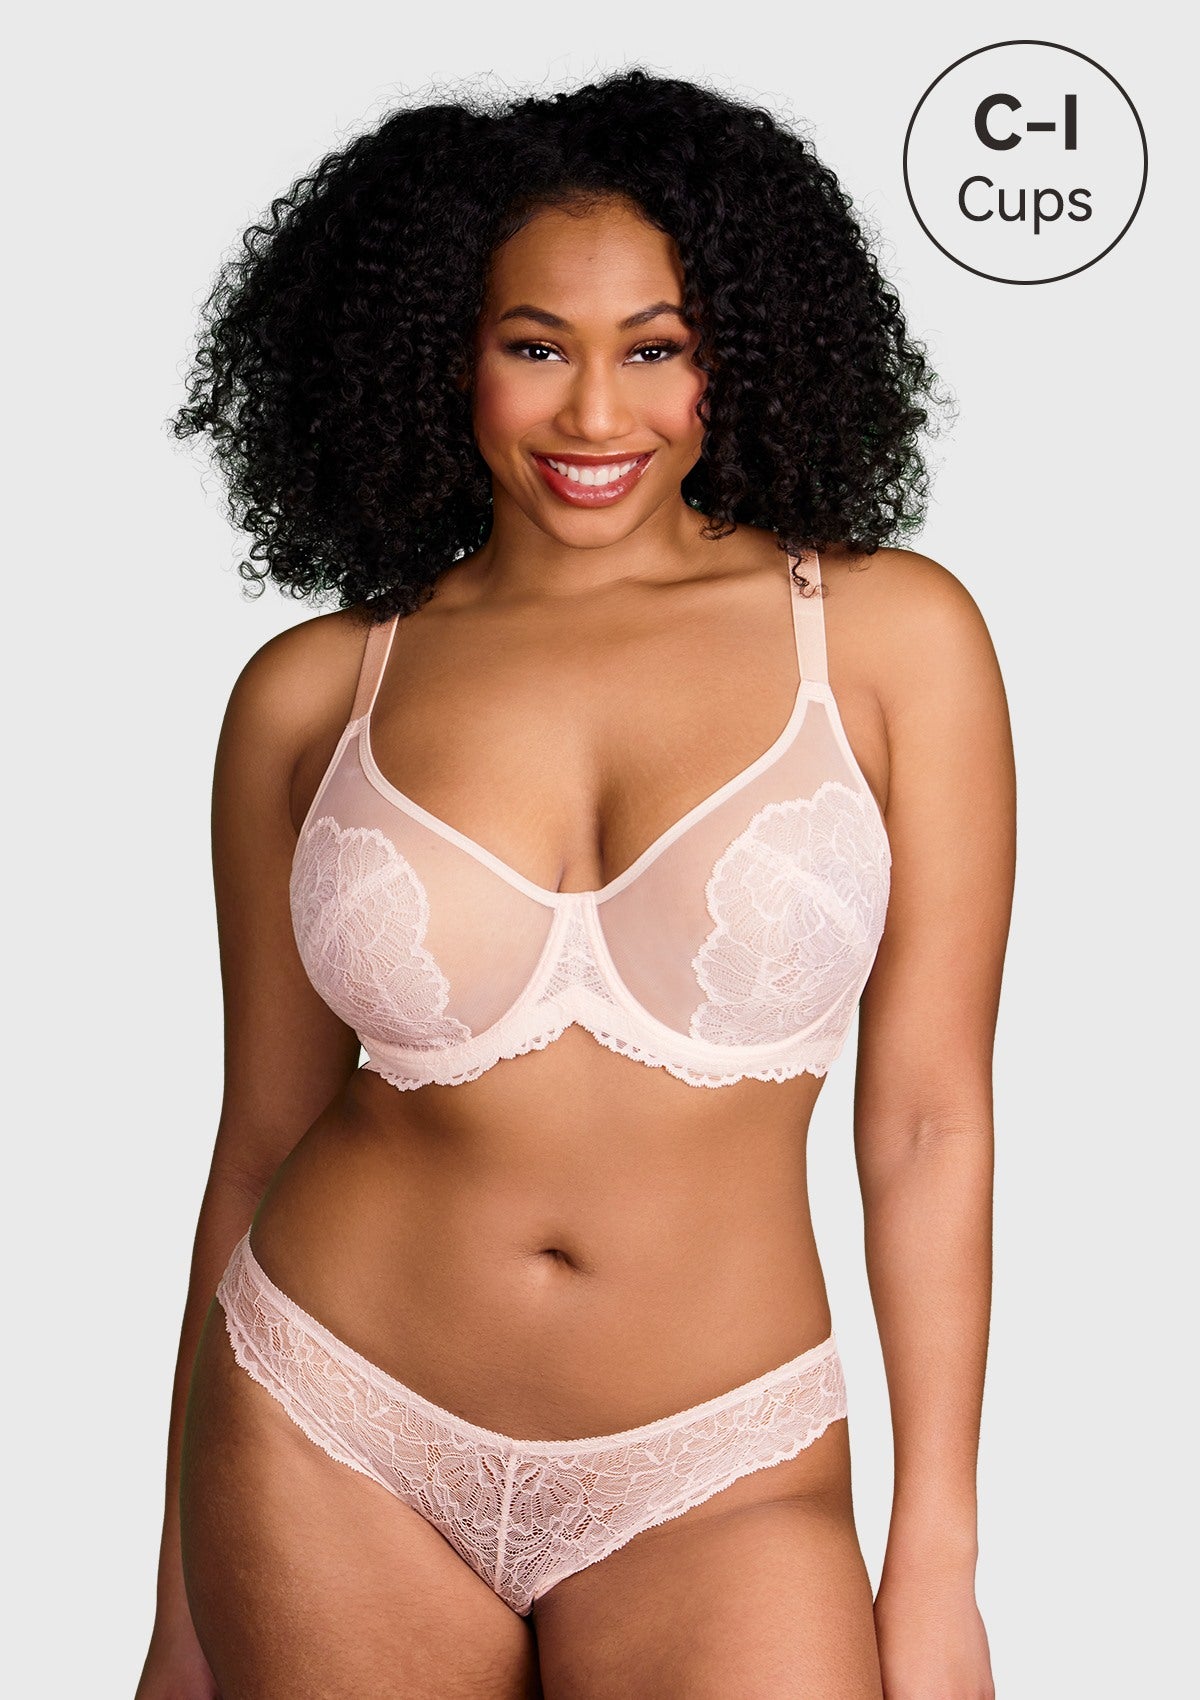 HSIA Blossom Sheer Lace Bra: Comfortable Underwire Bra For Big Busts - White / 40 / C